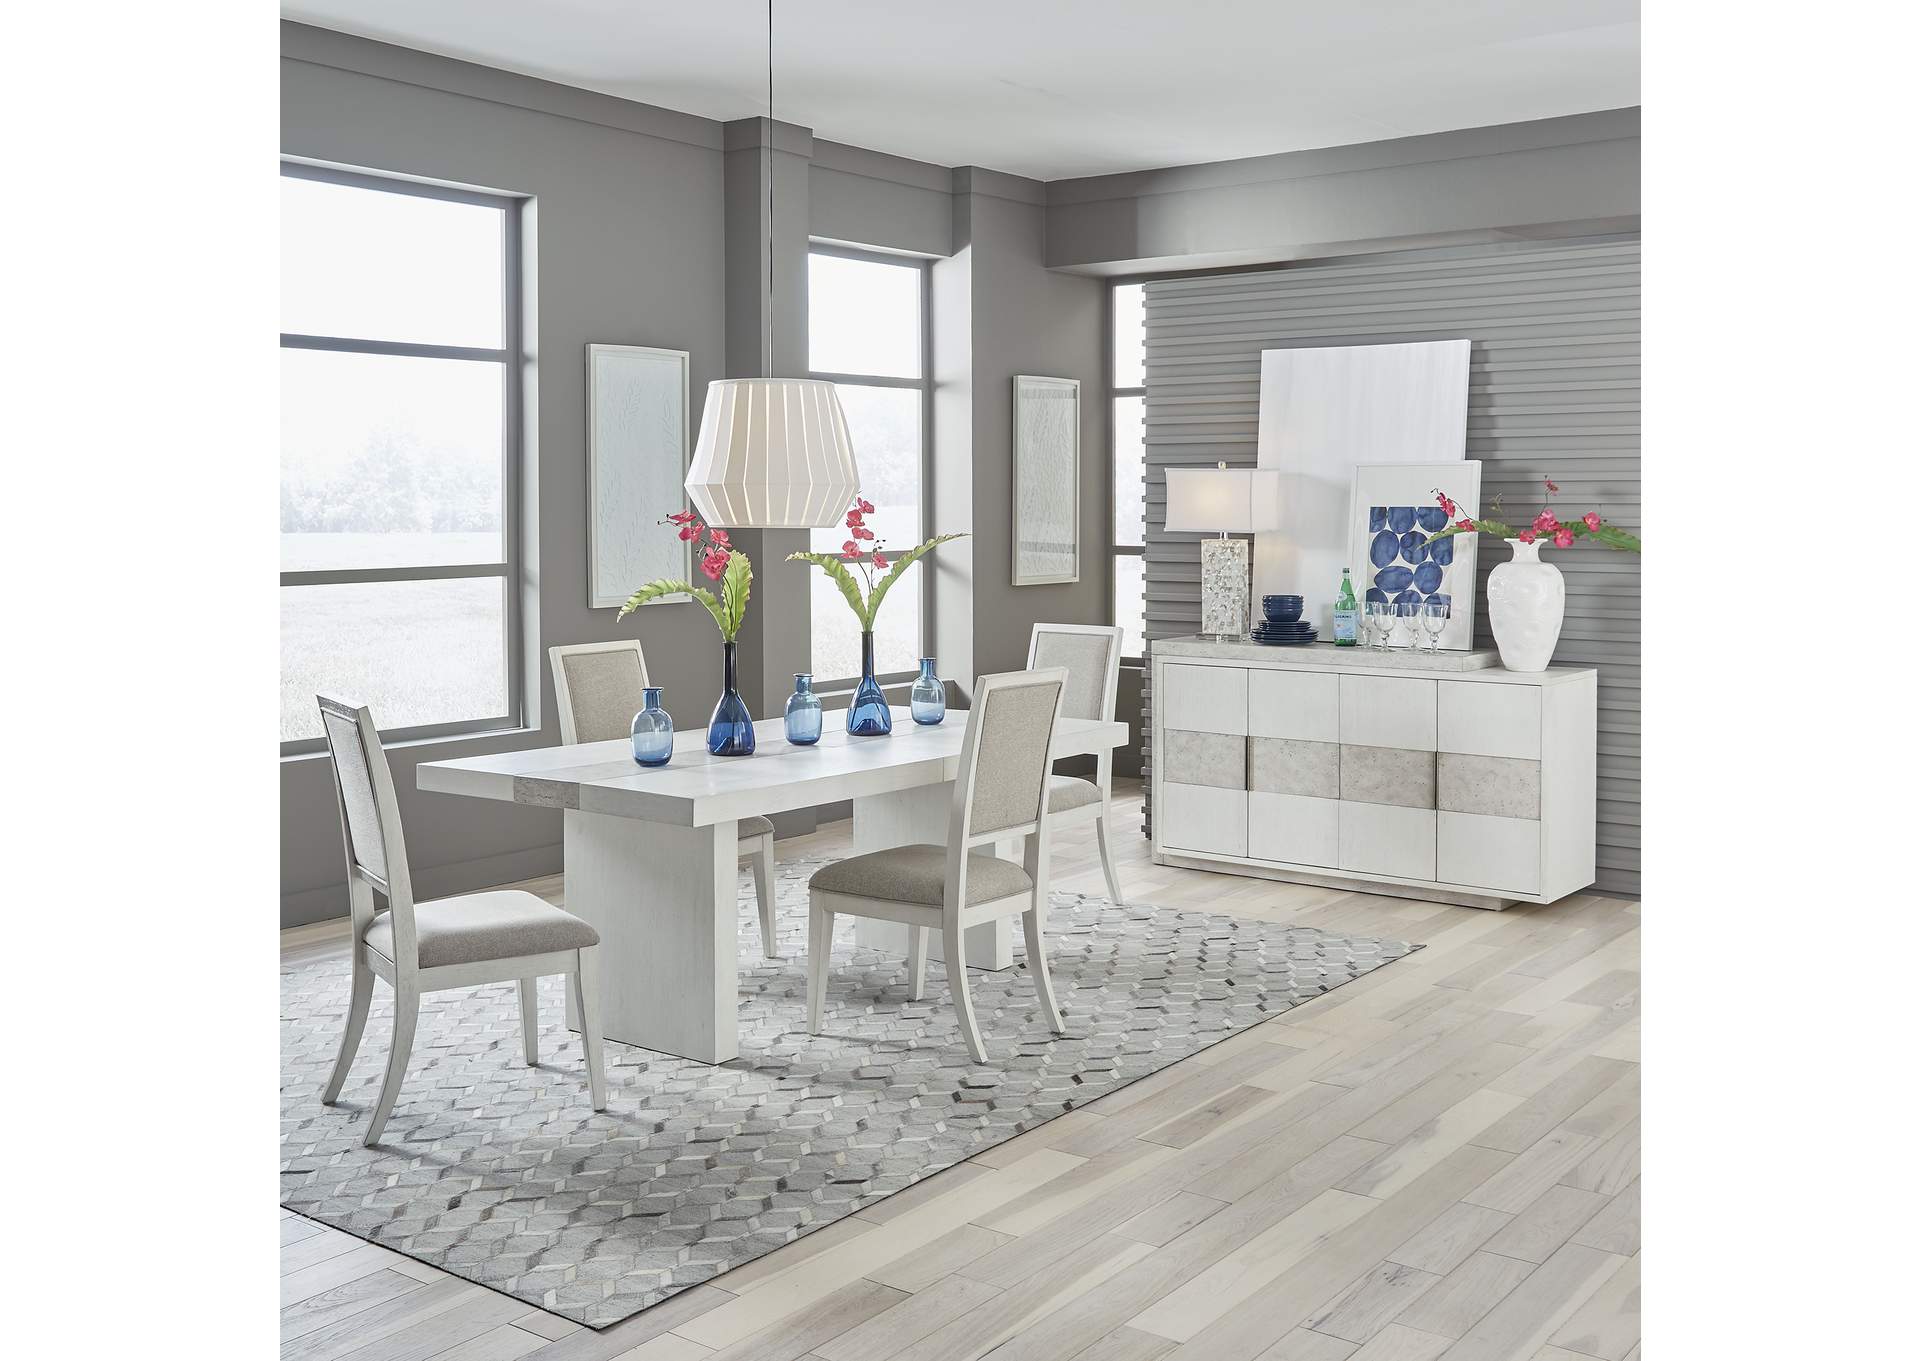 5 Piece Trestle Dining Room, Trestle Dining Table Set